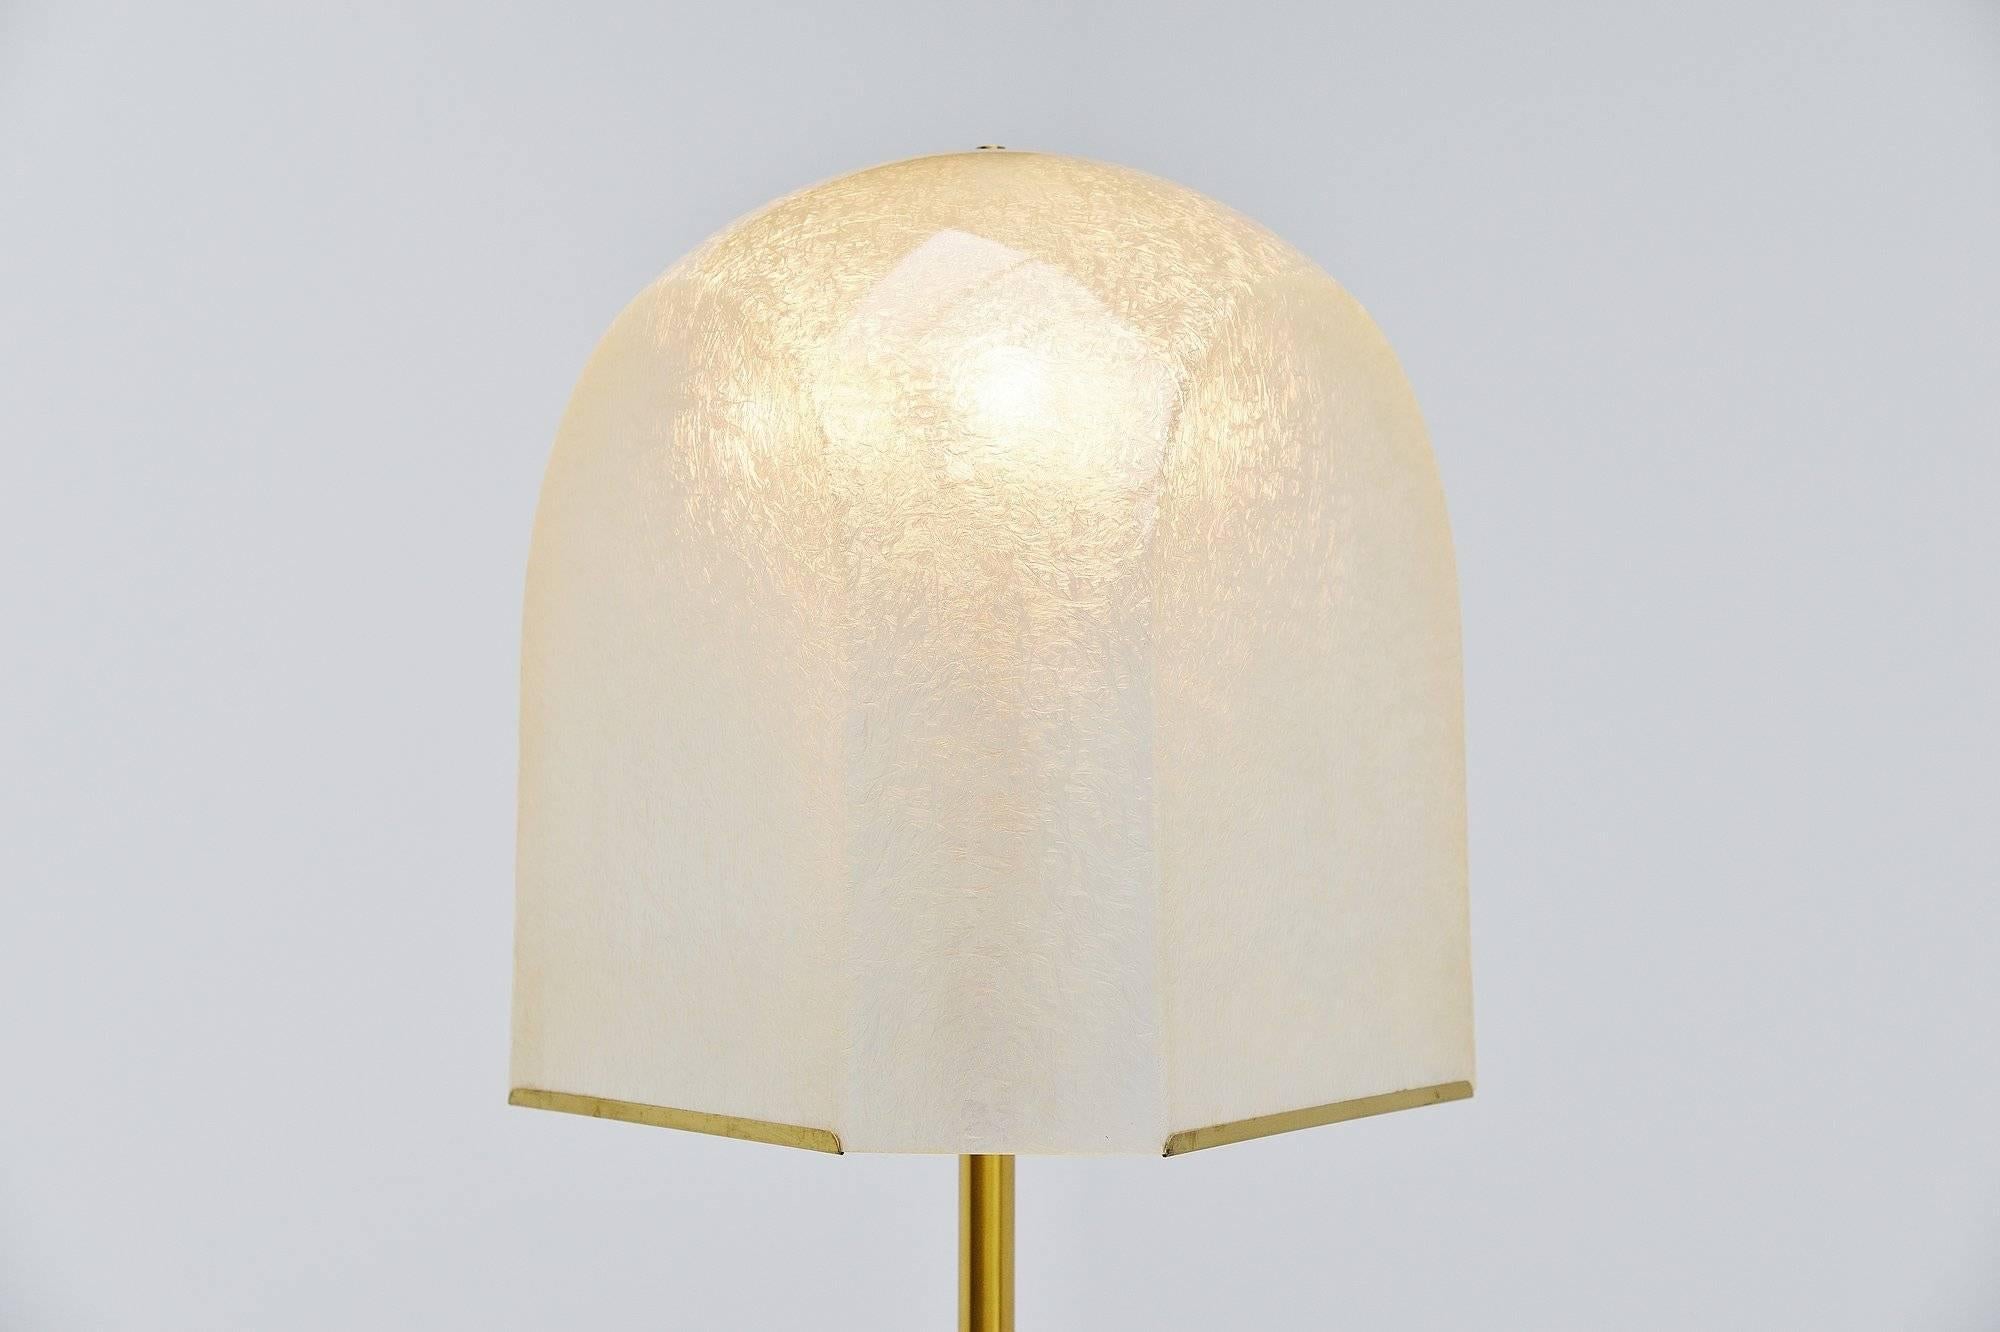 Large impressive floor lamp designed by Salvatore Gregorietti and manufactured by Lamperti, Italy 1960. This lamp has a nice fiberglass shade and a brass stem with a weighted travertine base. The lamp gives very nice and warm light when lit and uses